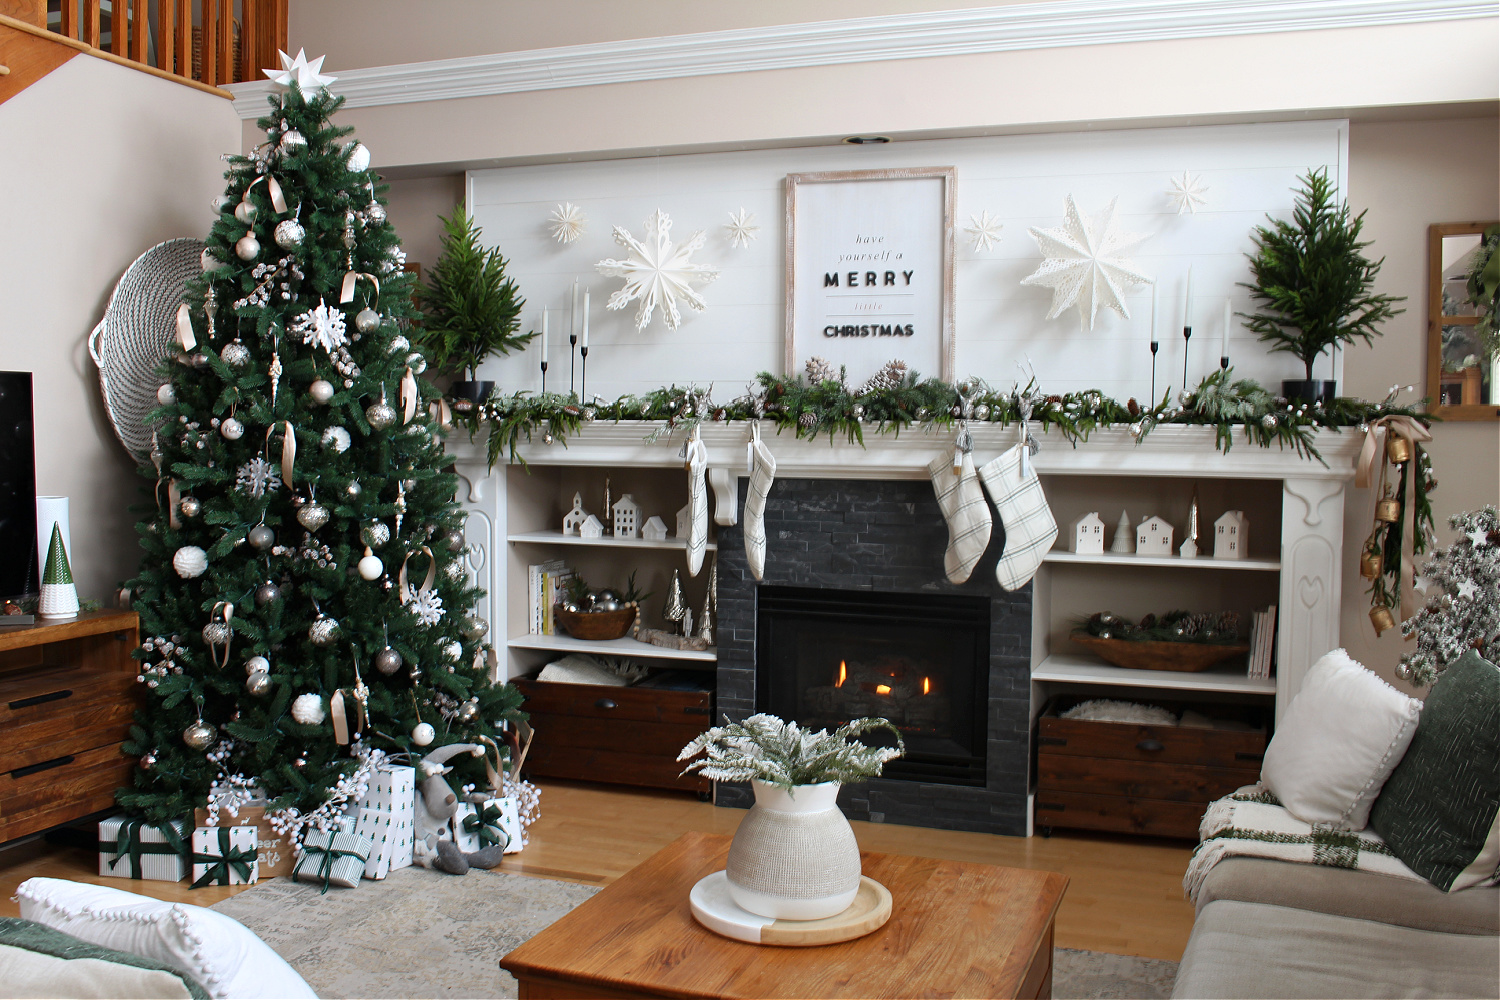 Living room decorated for Christmas in green and white.